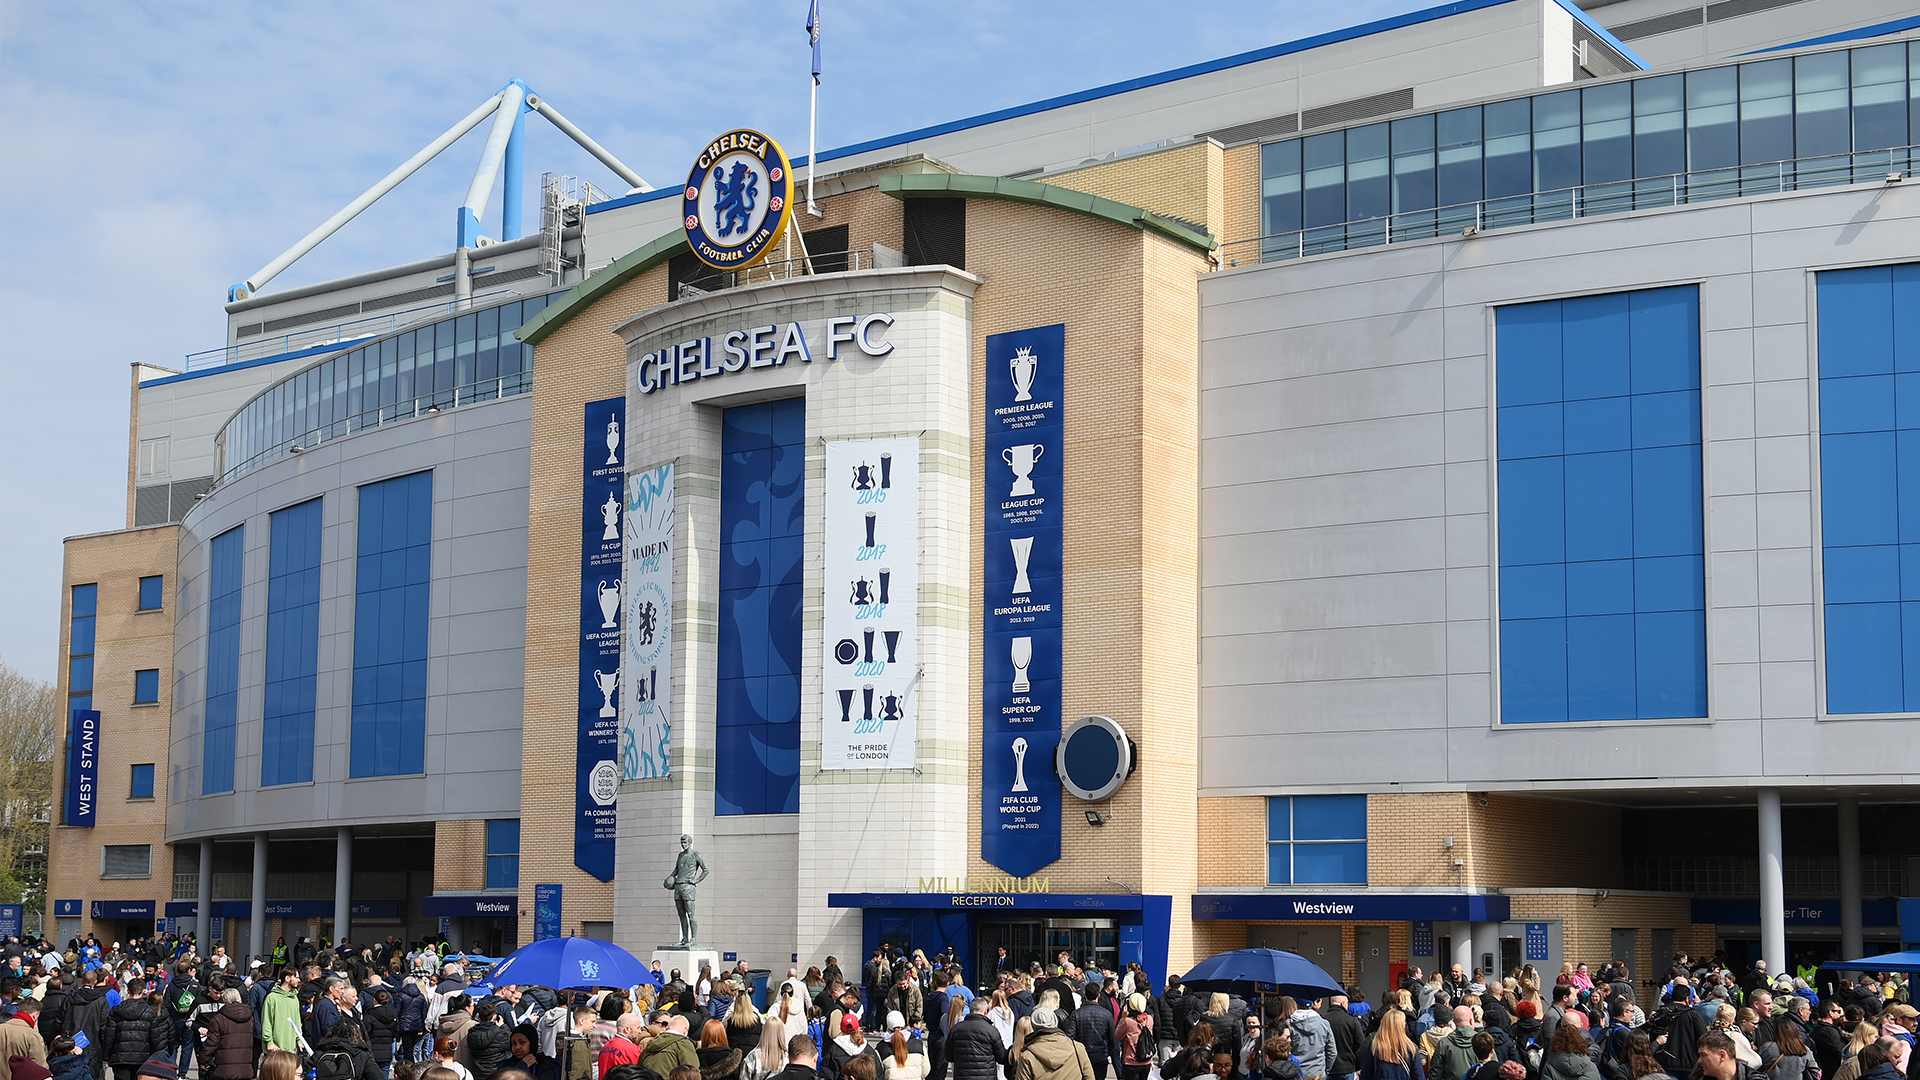 More bad news for Chelsea! Blues' plans to redevelop Stamford Bridge could be blocked after military veteran takes out interim court injunction